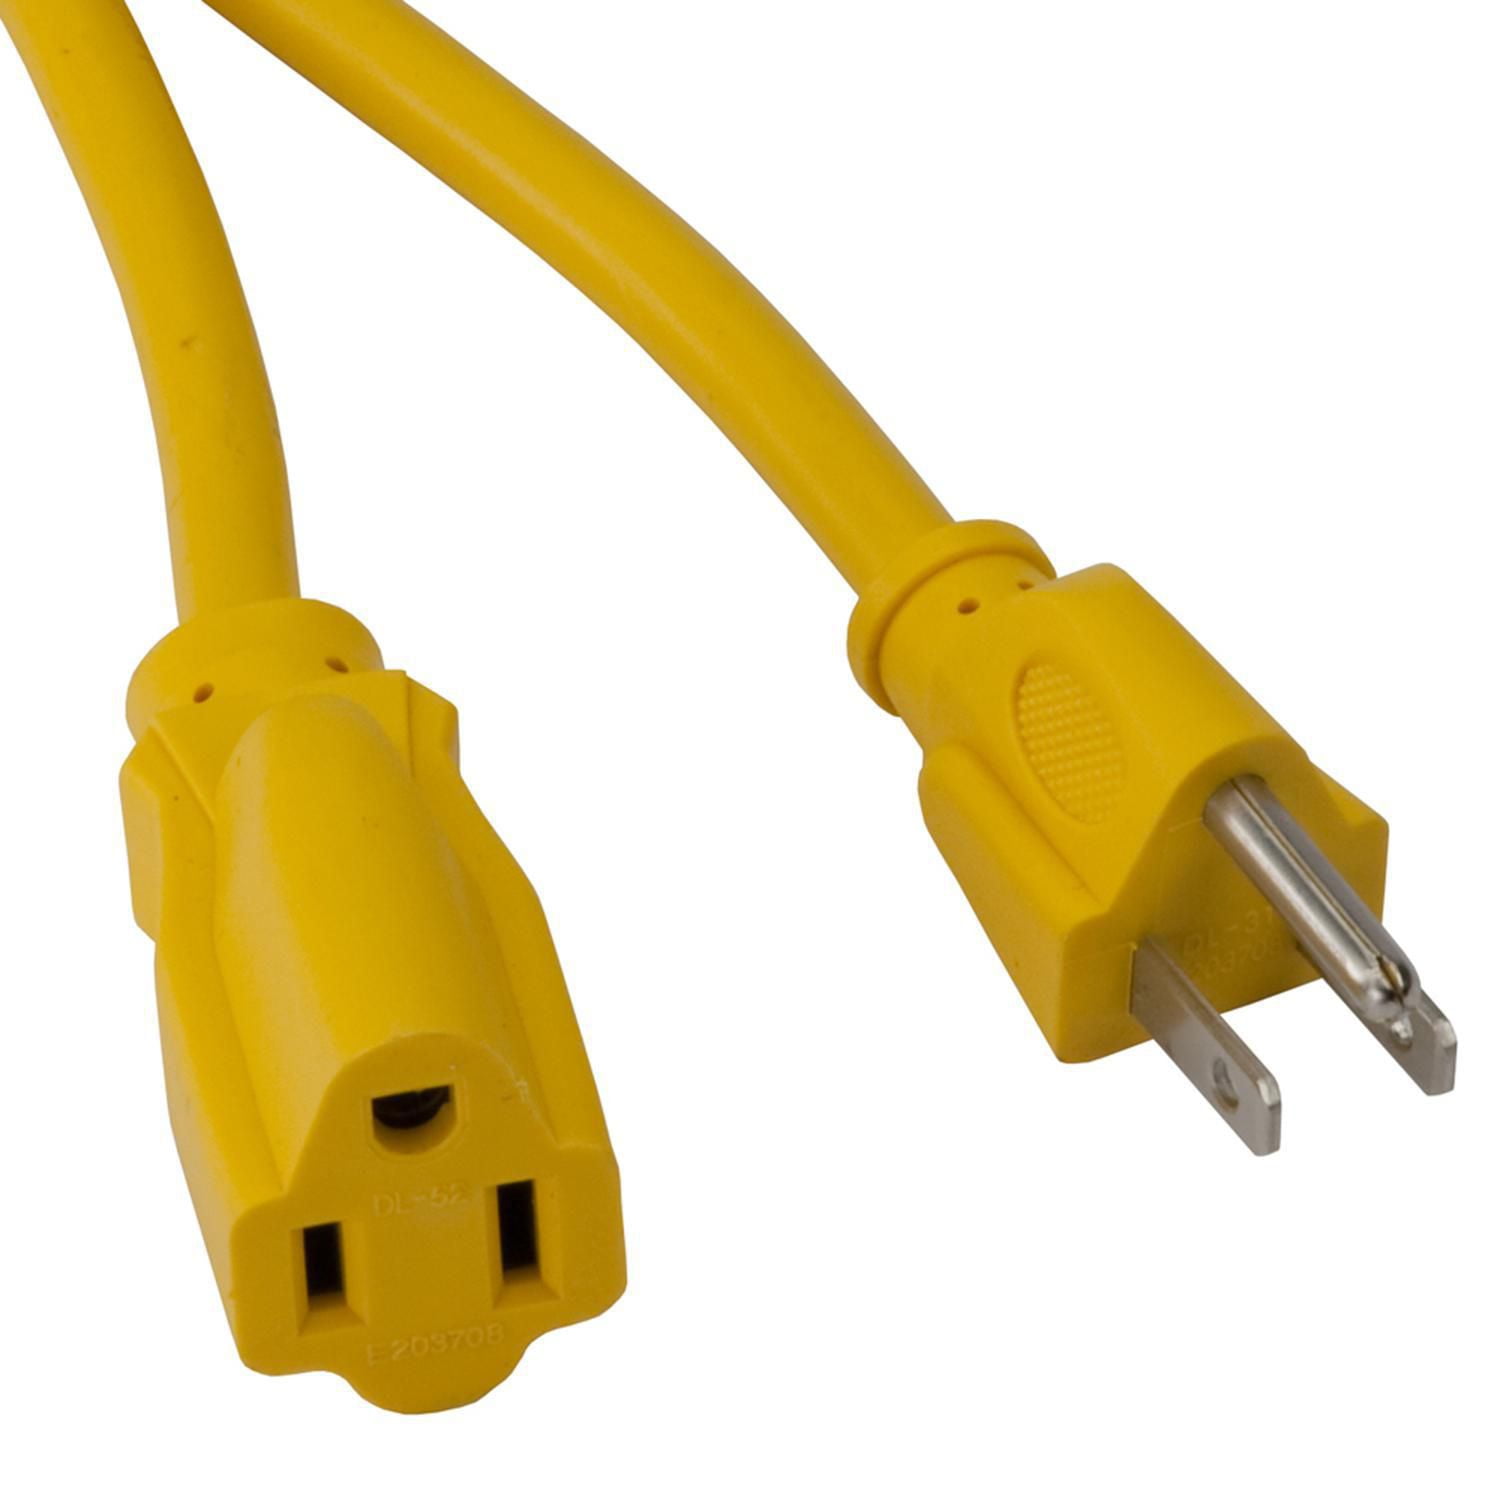 Bayco Contractor Grade Single Tap Extension Cord - 100 ft single-tap -  yellow 16 gauge/3 conductor cord, 1 each, sold by each 